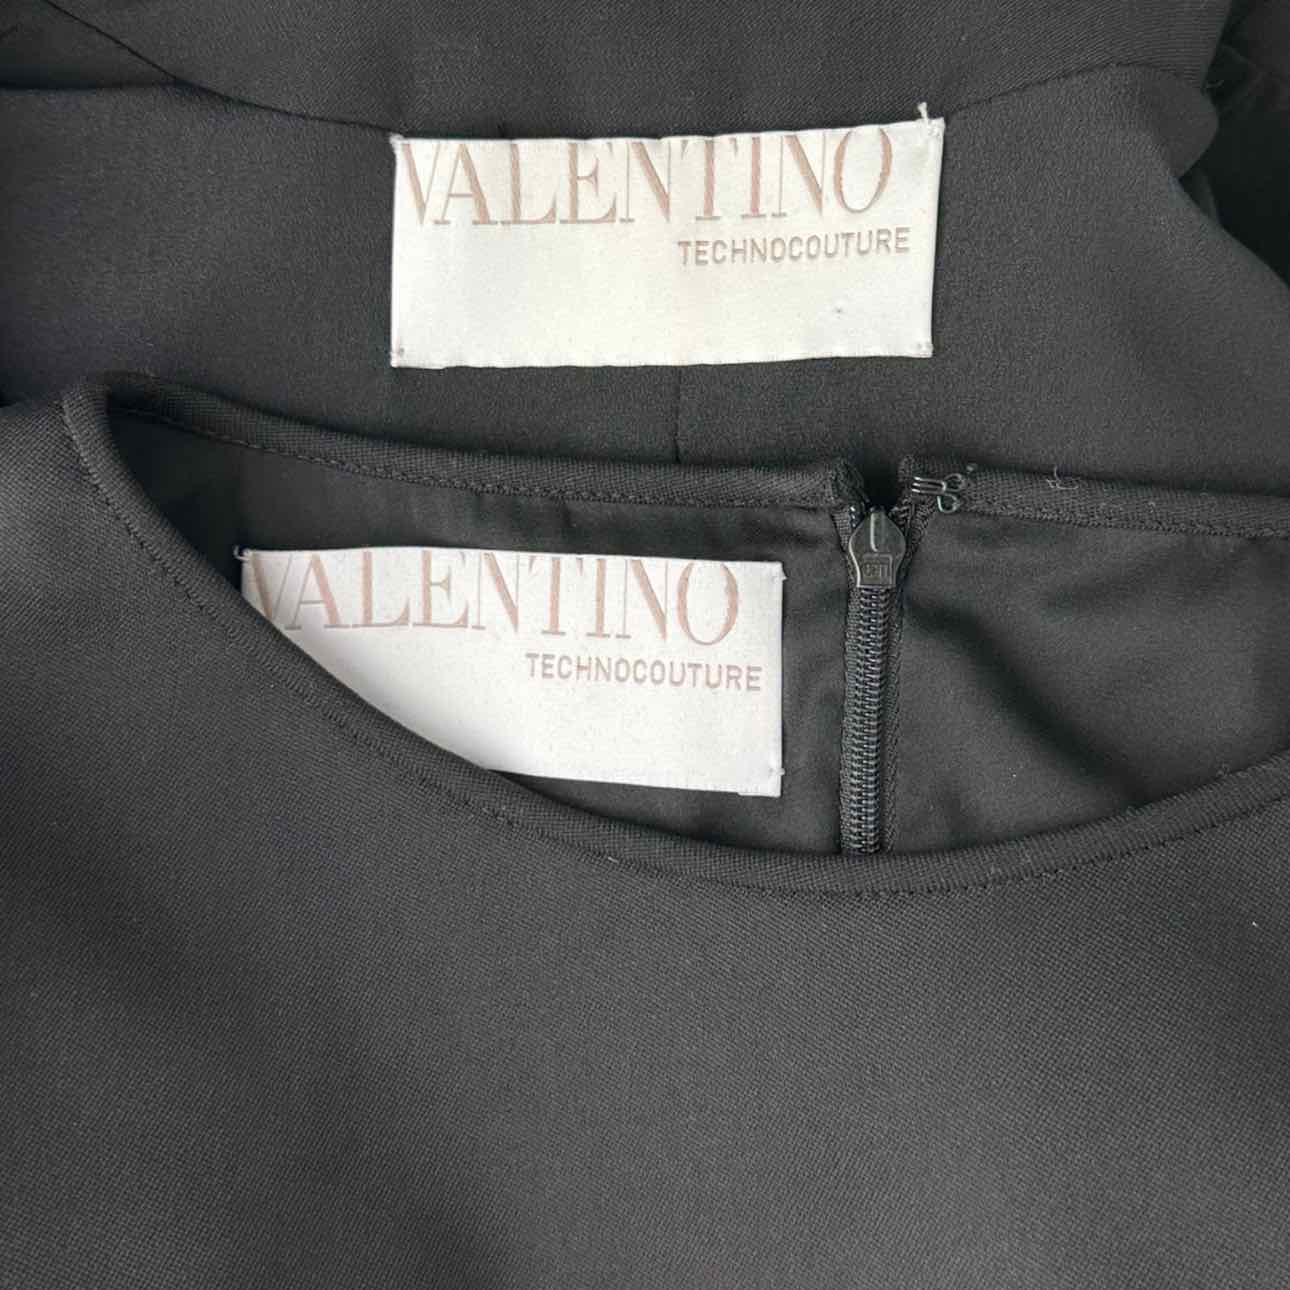 VALENTINO TECHNOCOUTURE Black 2 Piece Dress and Jacket, high end dress and jacket set